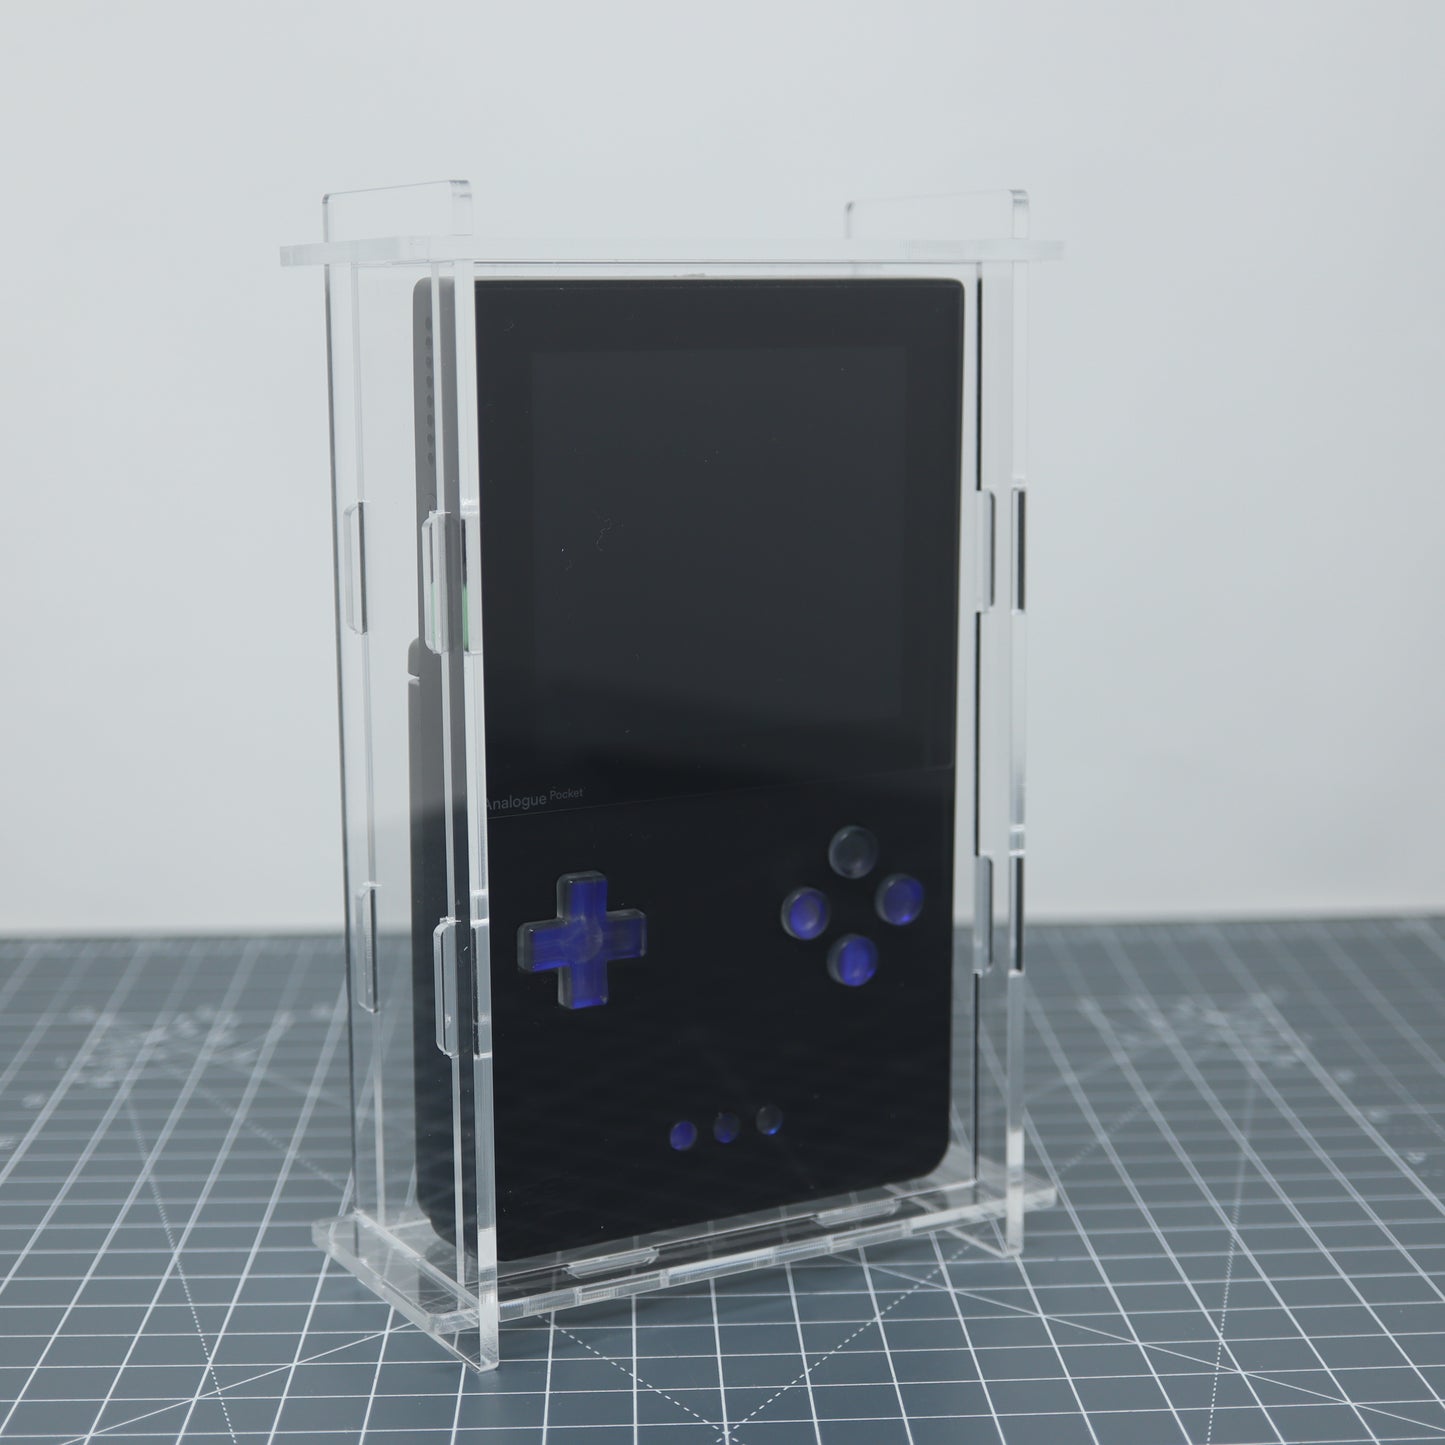 Analogue Pocket Loose Console - Display Capsule